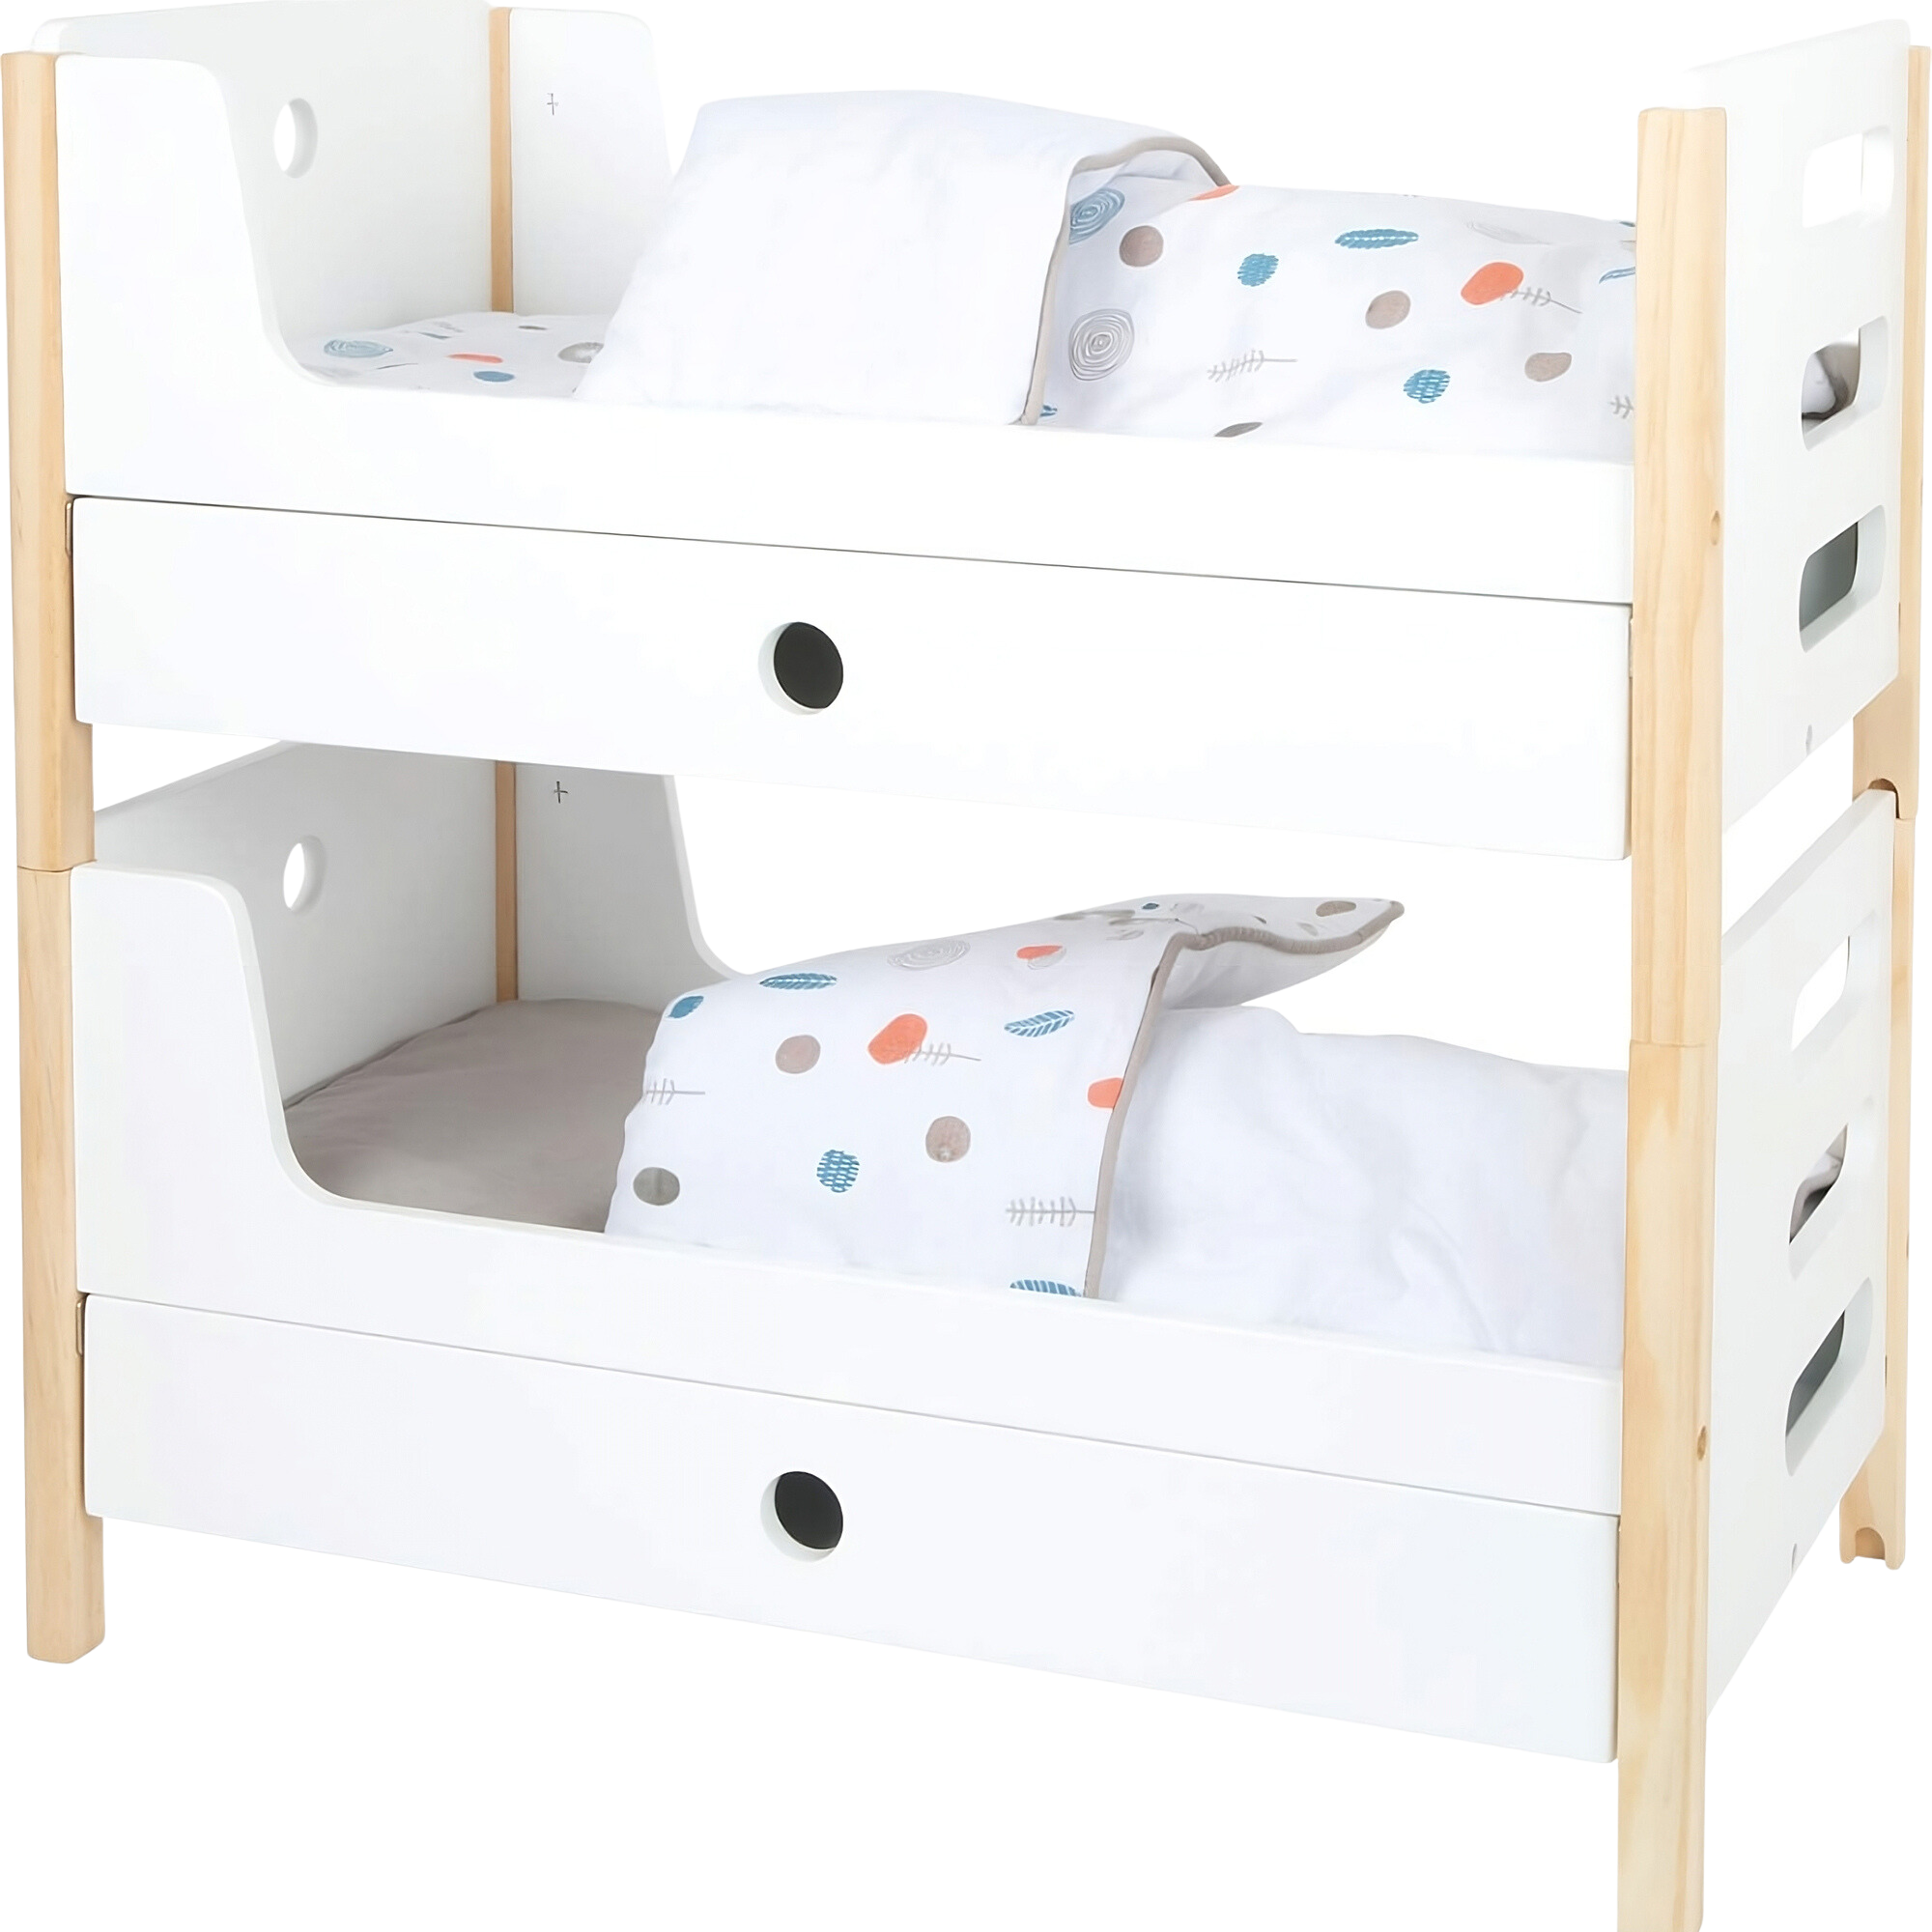 Wooden bunk beds for dolls "Little Button"